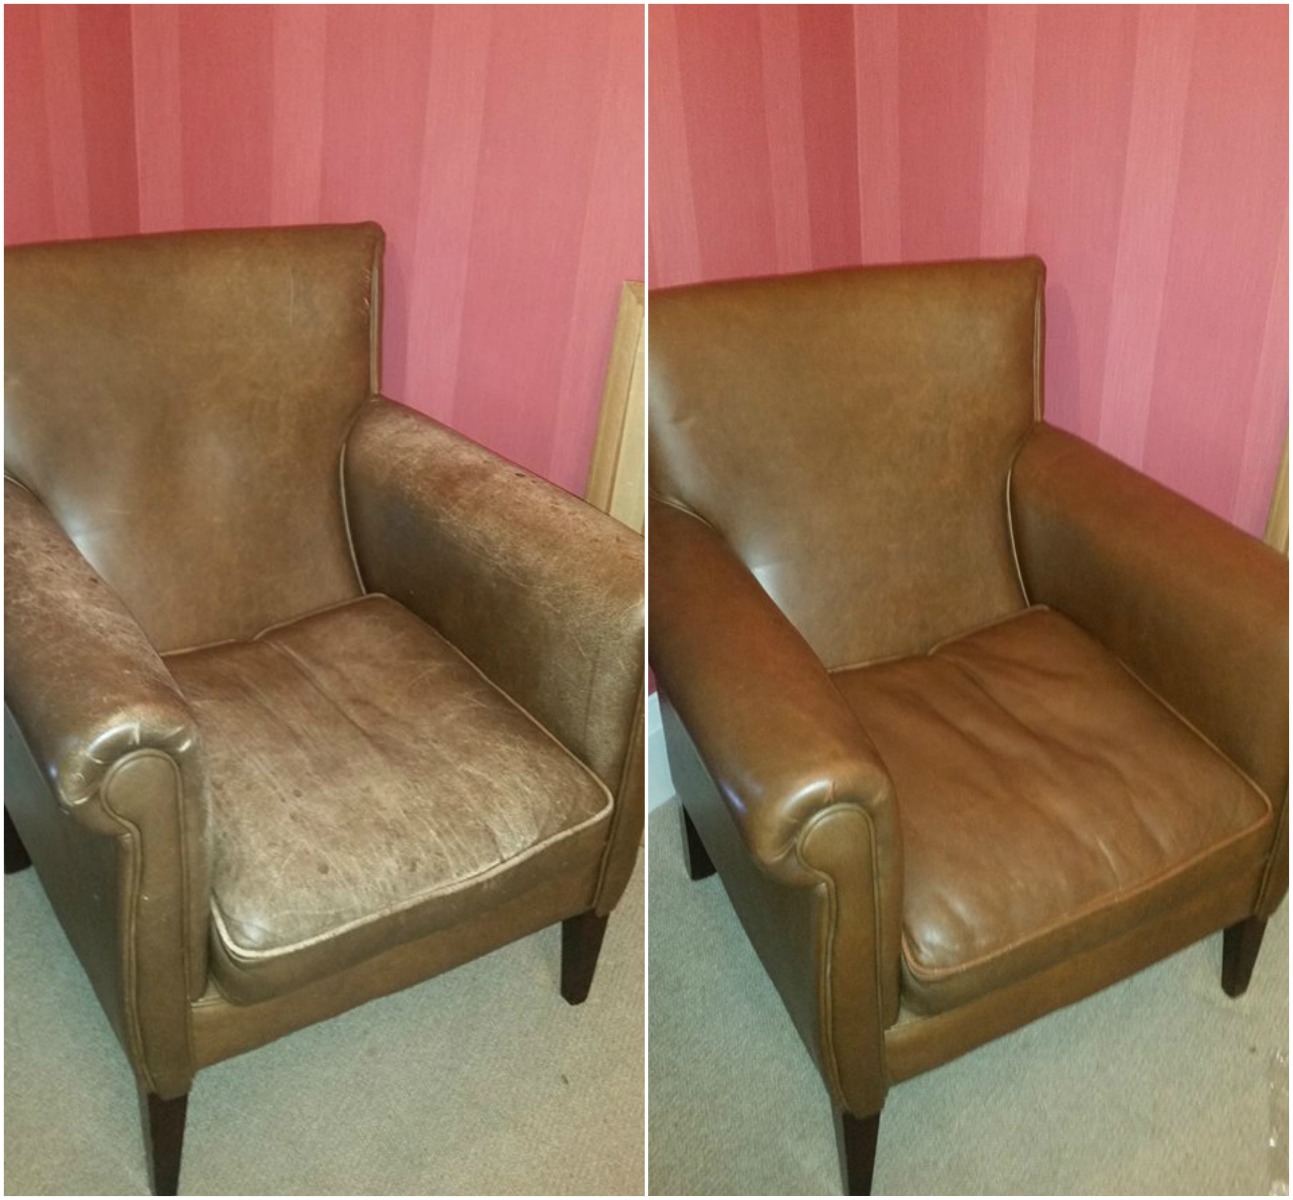 Restoring Colour To A Faded Leather Sofa, Recondition Leather Couch